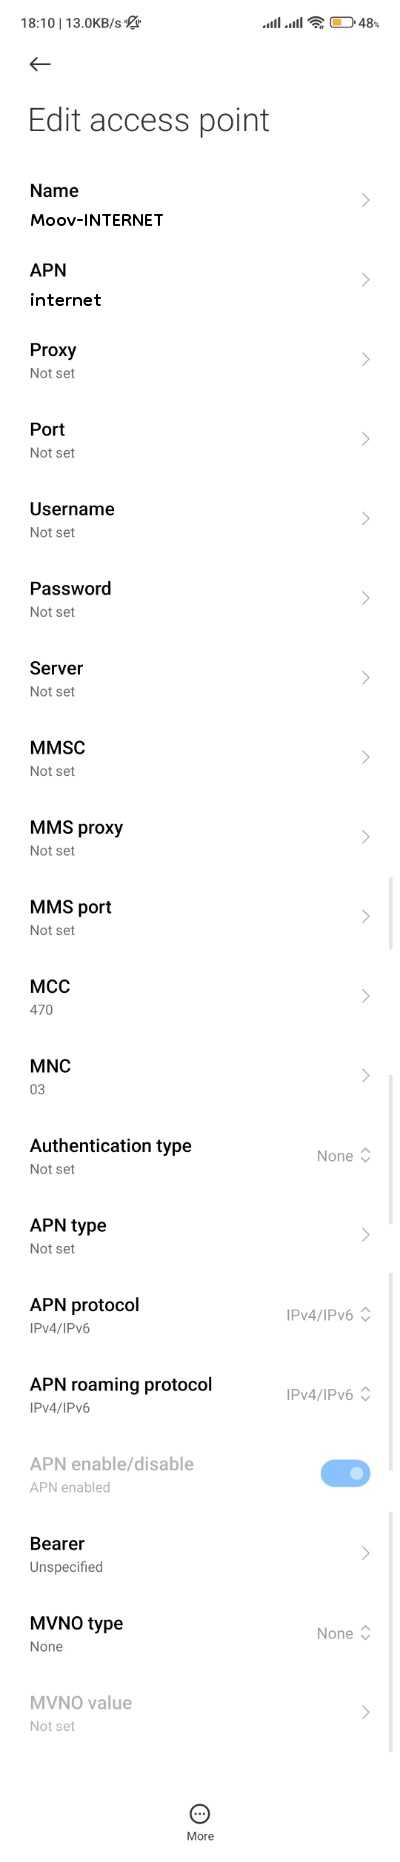 Moov Togo APN Setiings for Android iPhone 3G 4G Internet